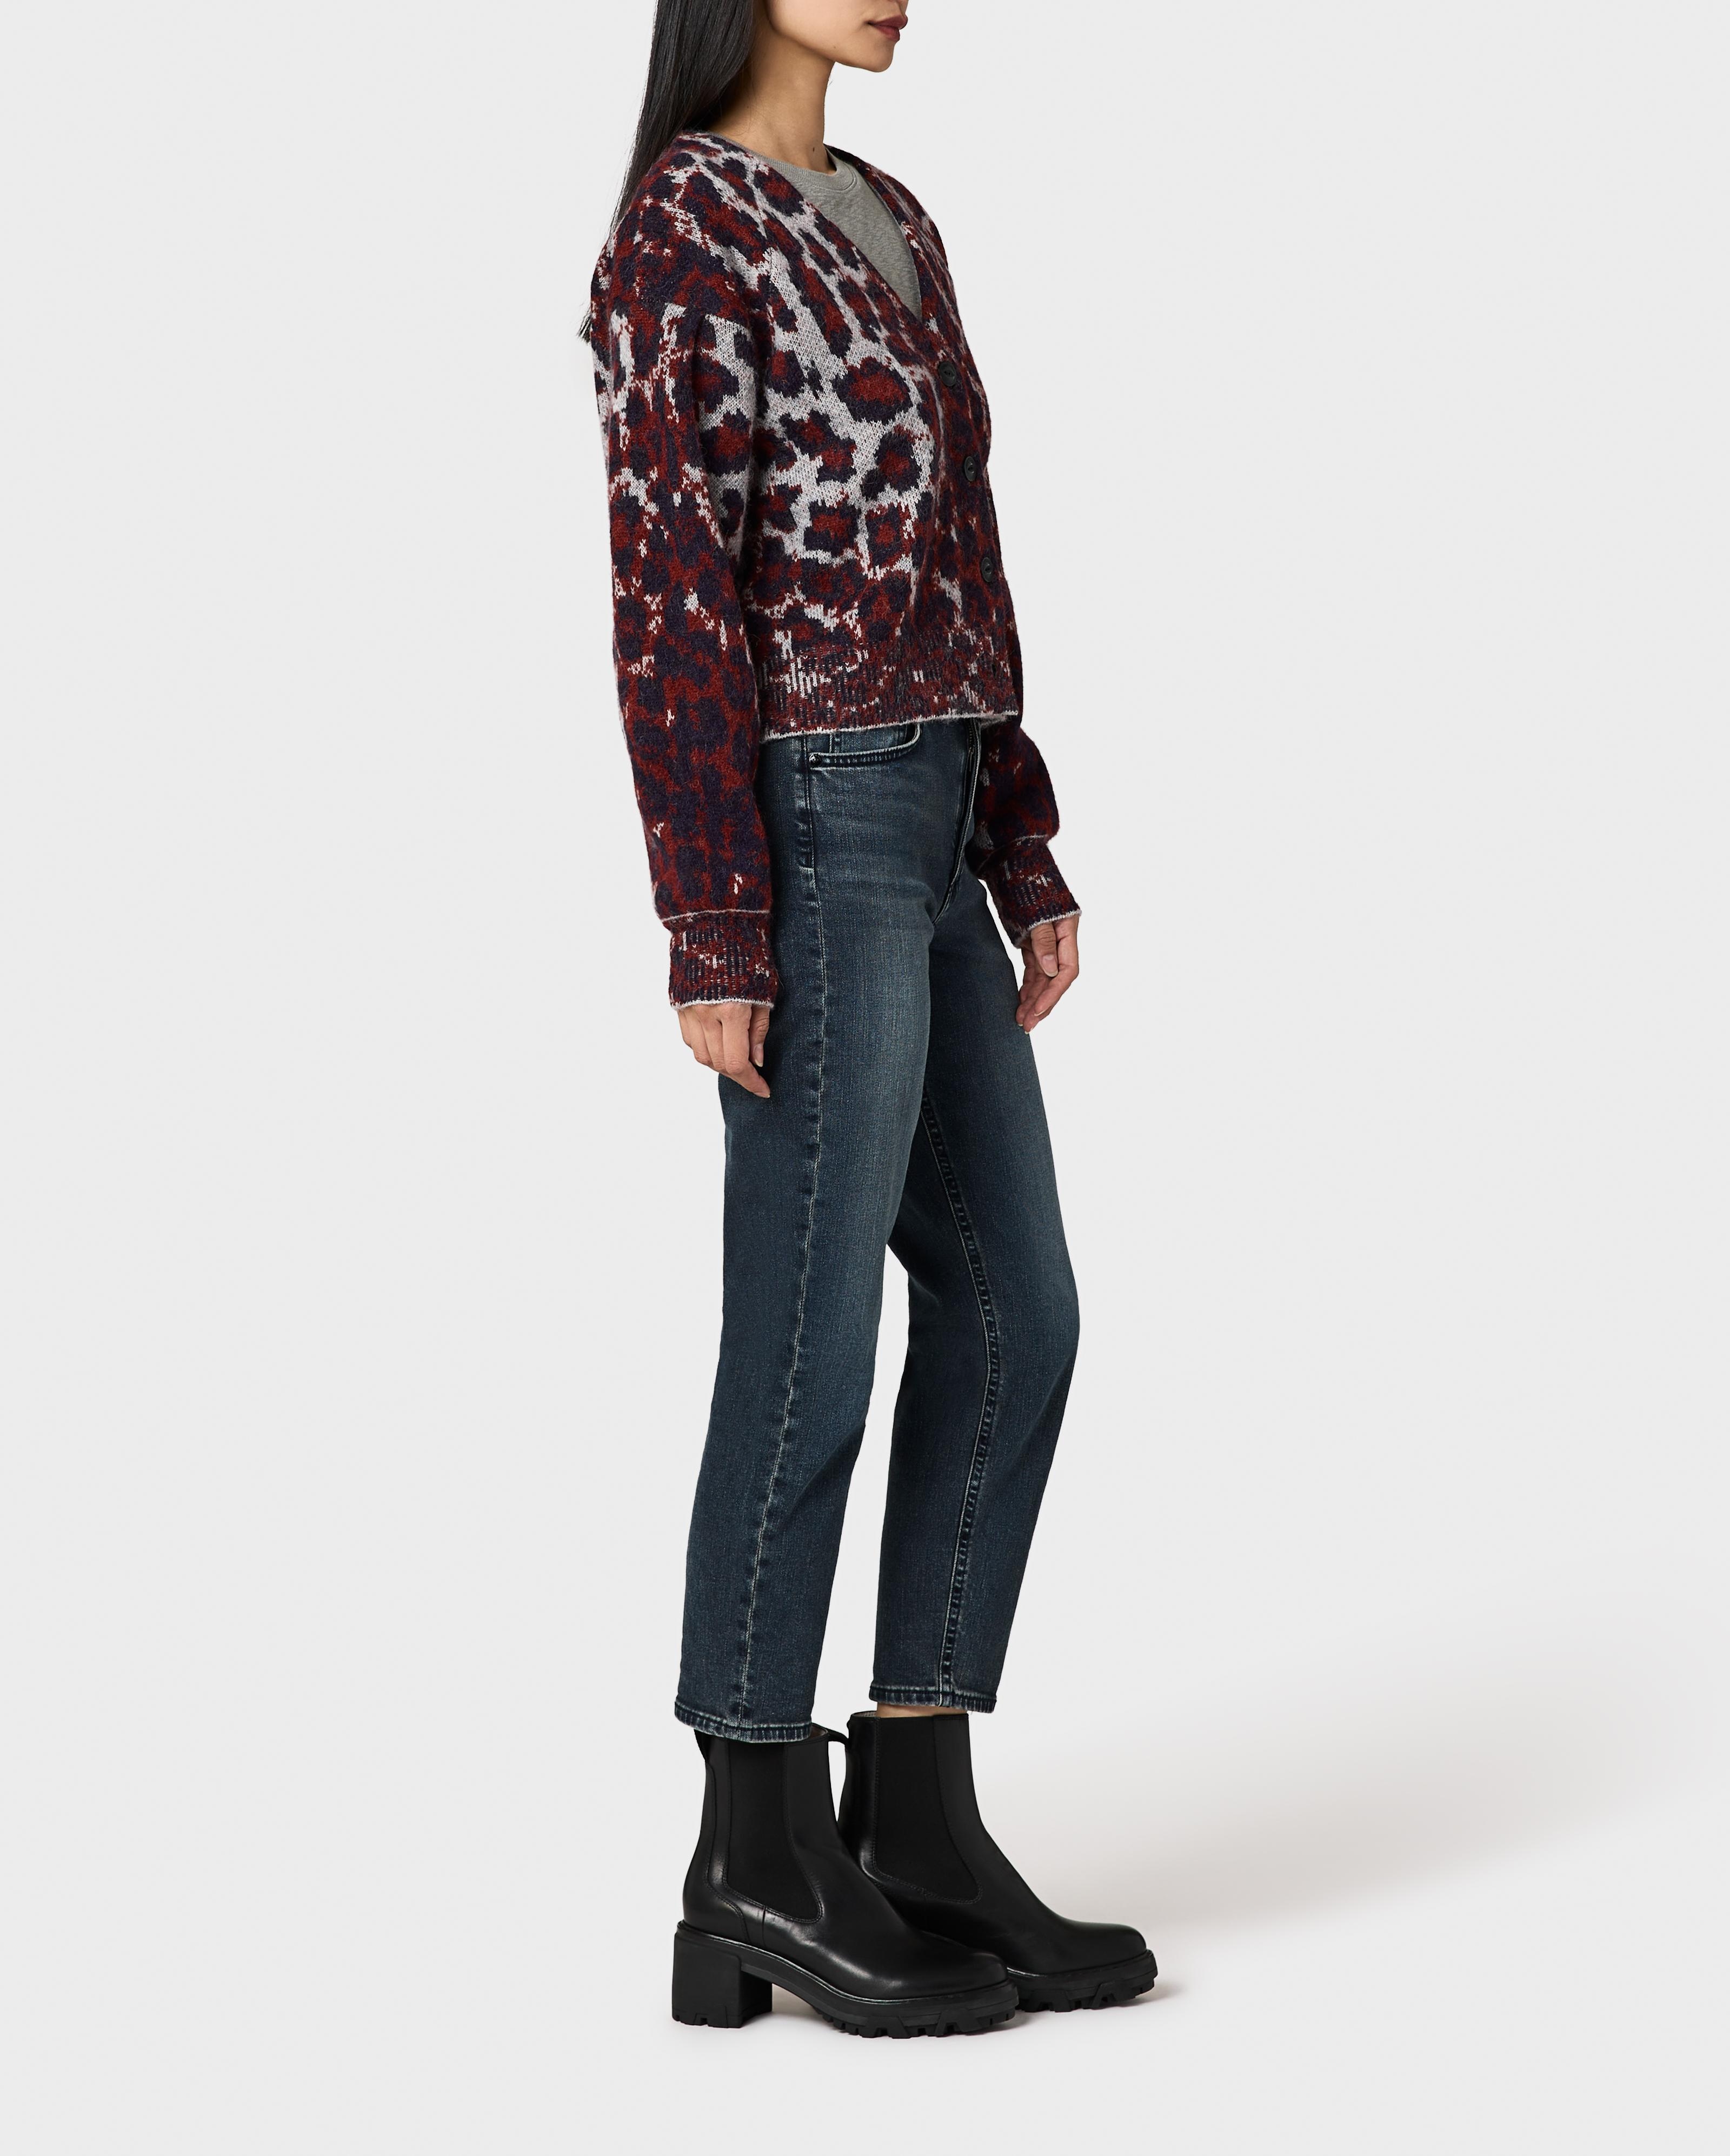 Sarah Wool Leopard Cardigan
Relaxed Fit - 2